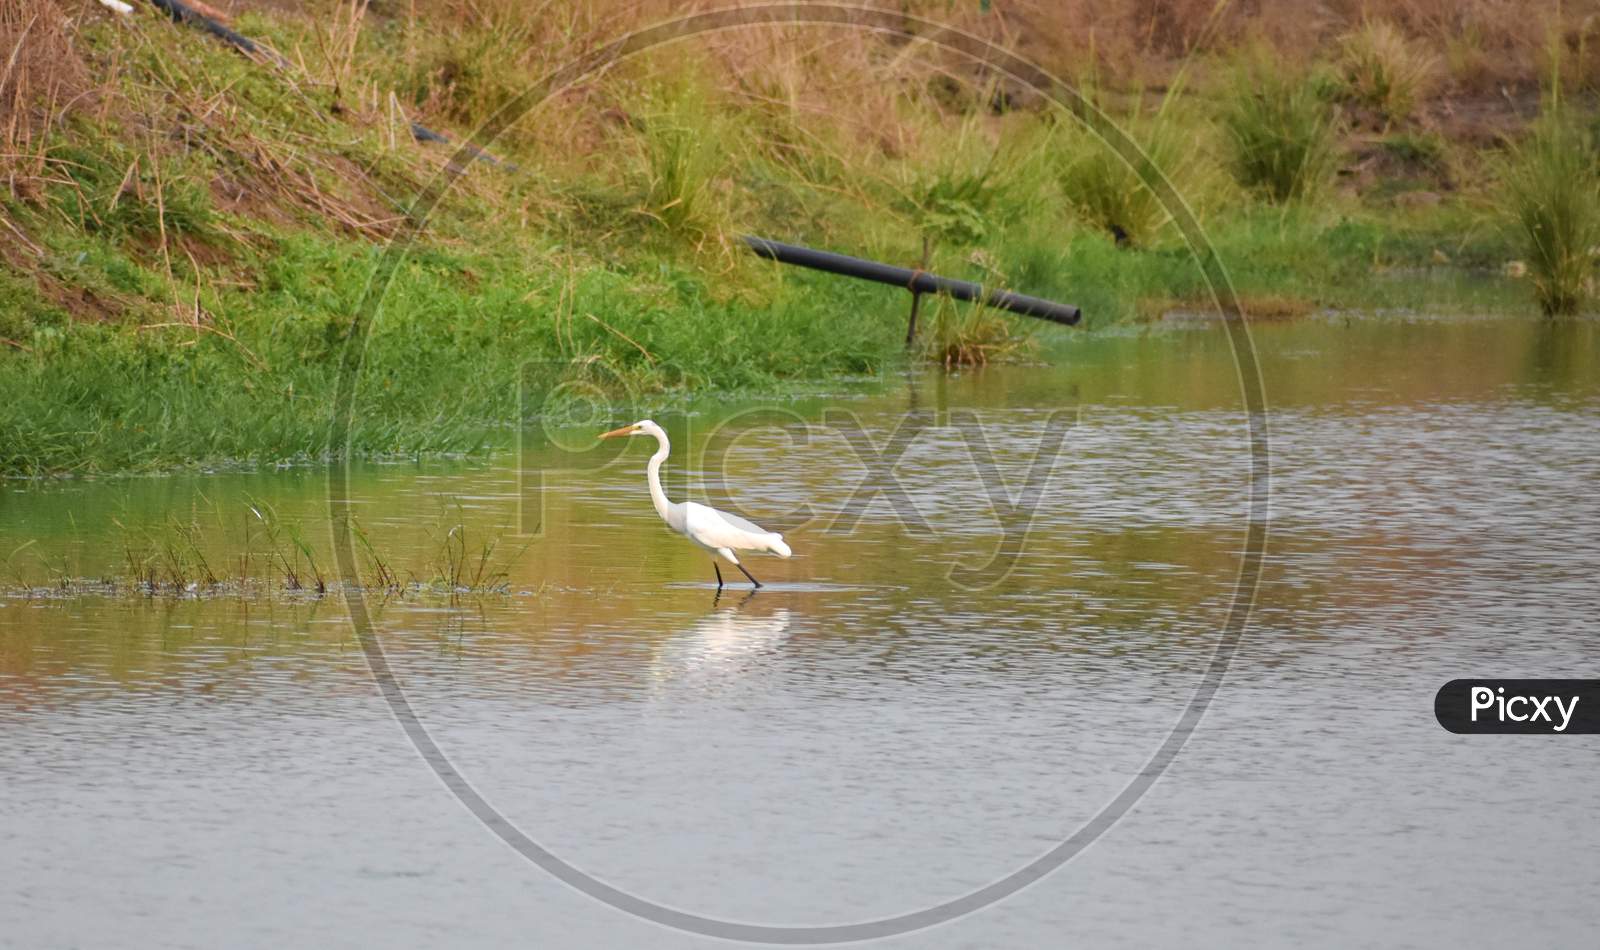 Great egret (Ardea alba) wading in the water.